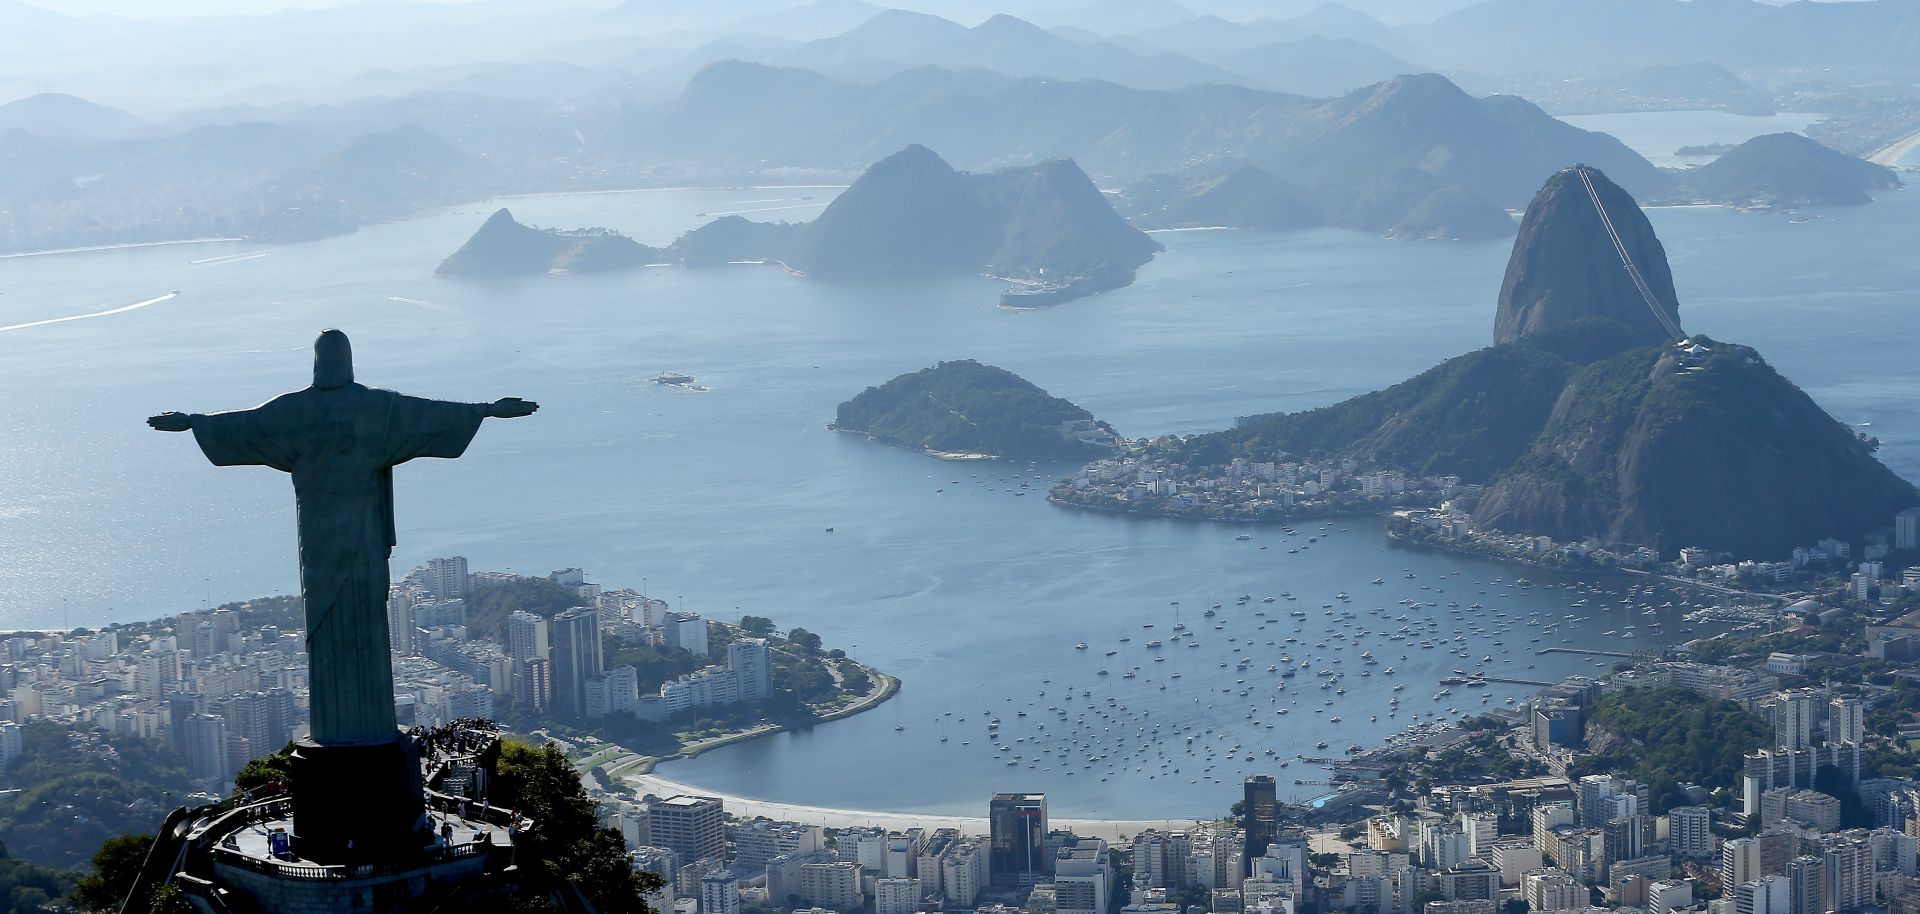 Christ the Redeemer, one of Brazil's most recognizable landmarks, overlooks the capital city of Rio De Janeiro. 